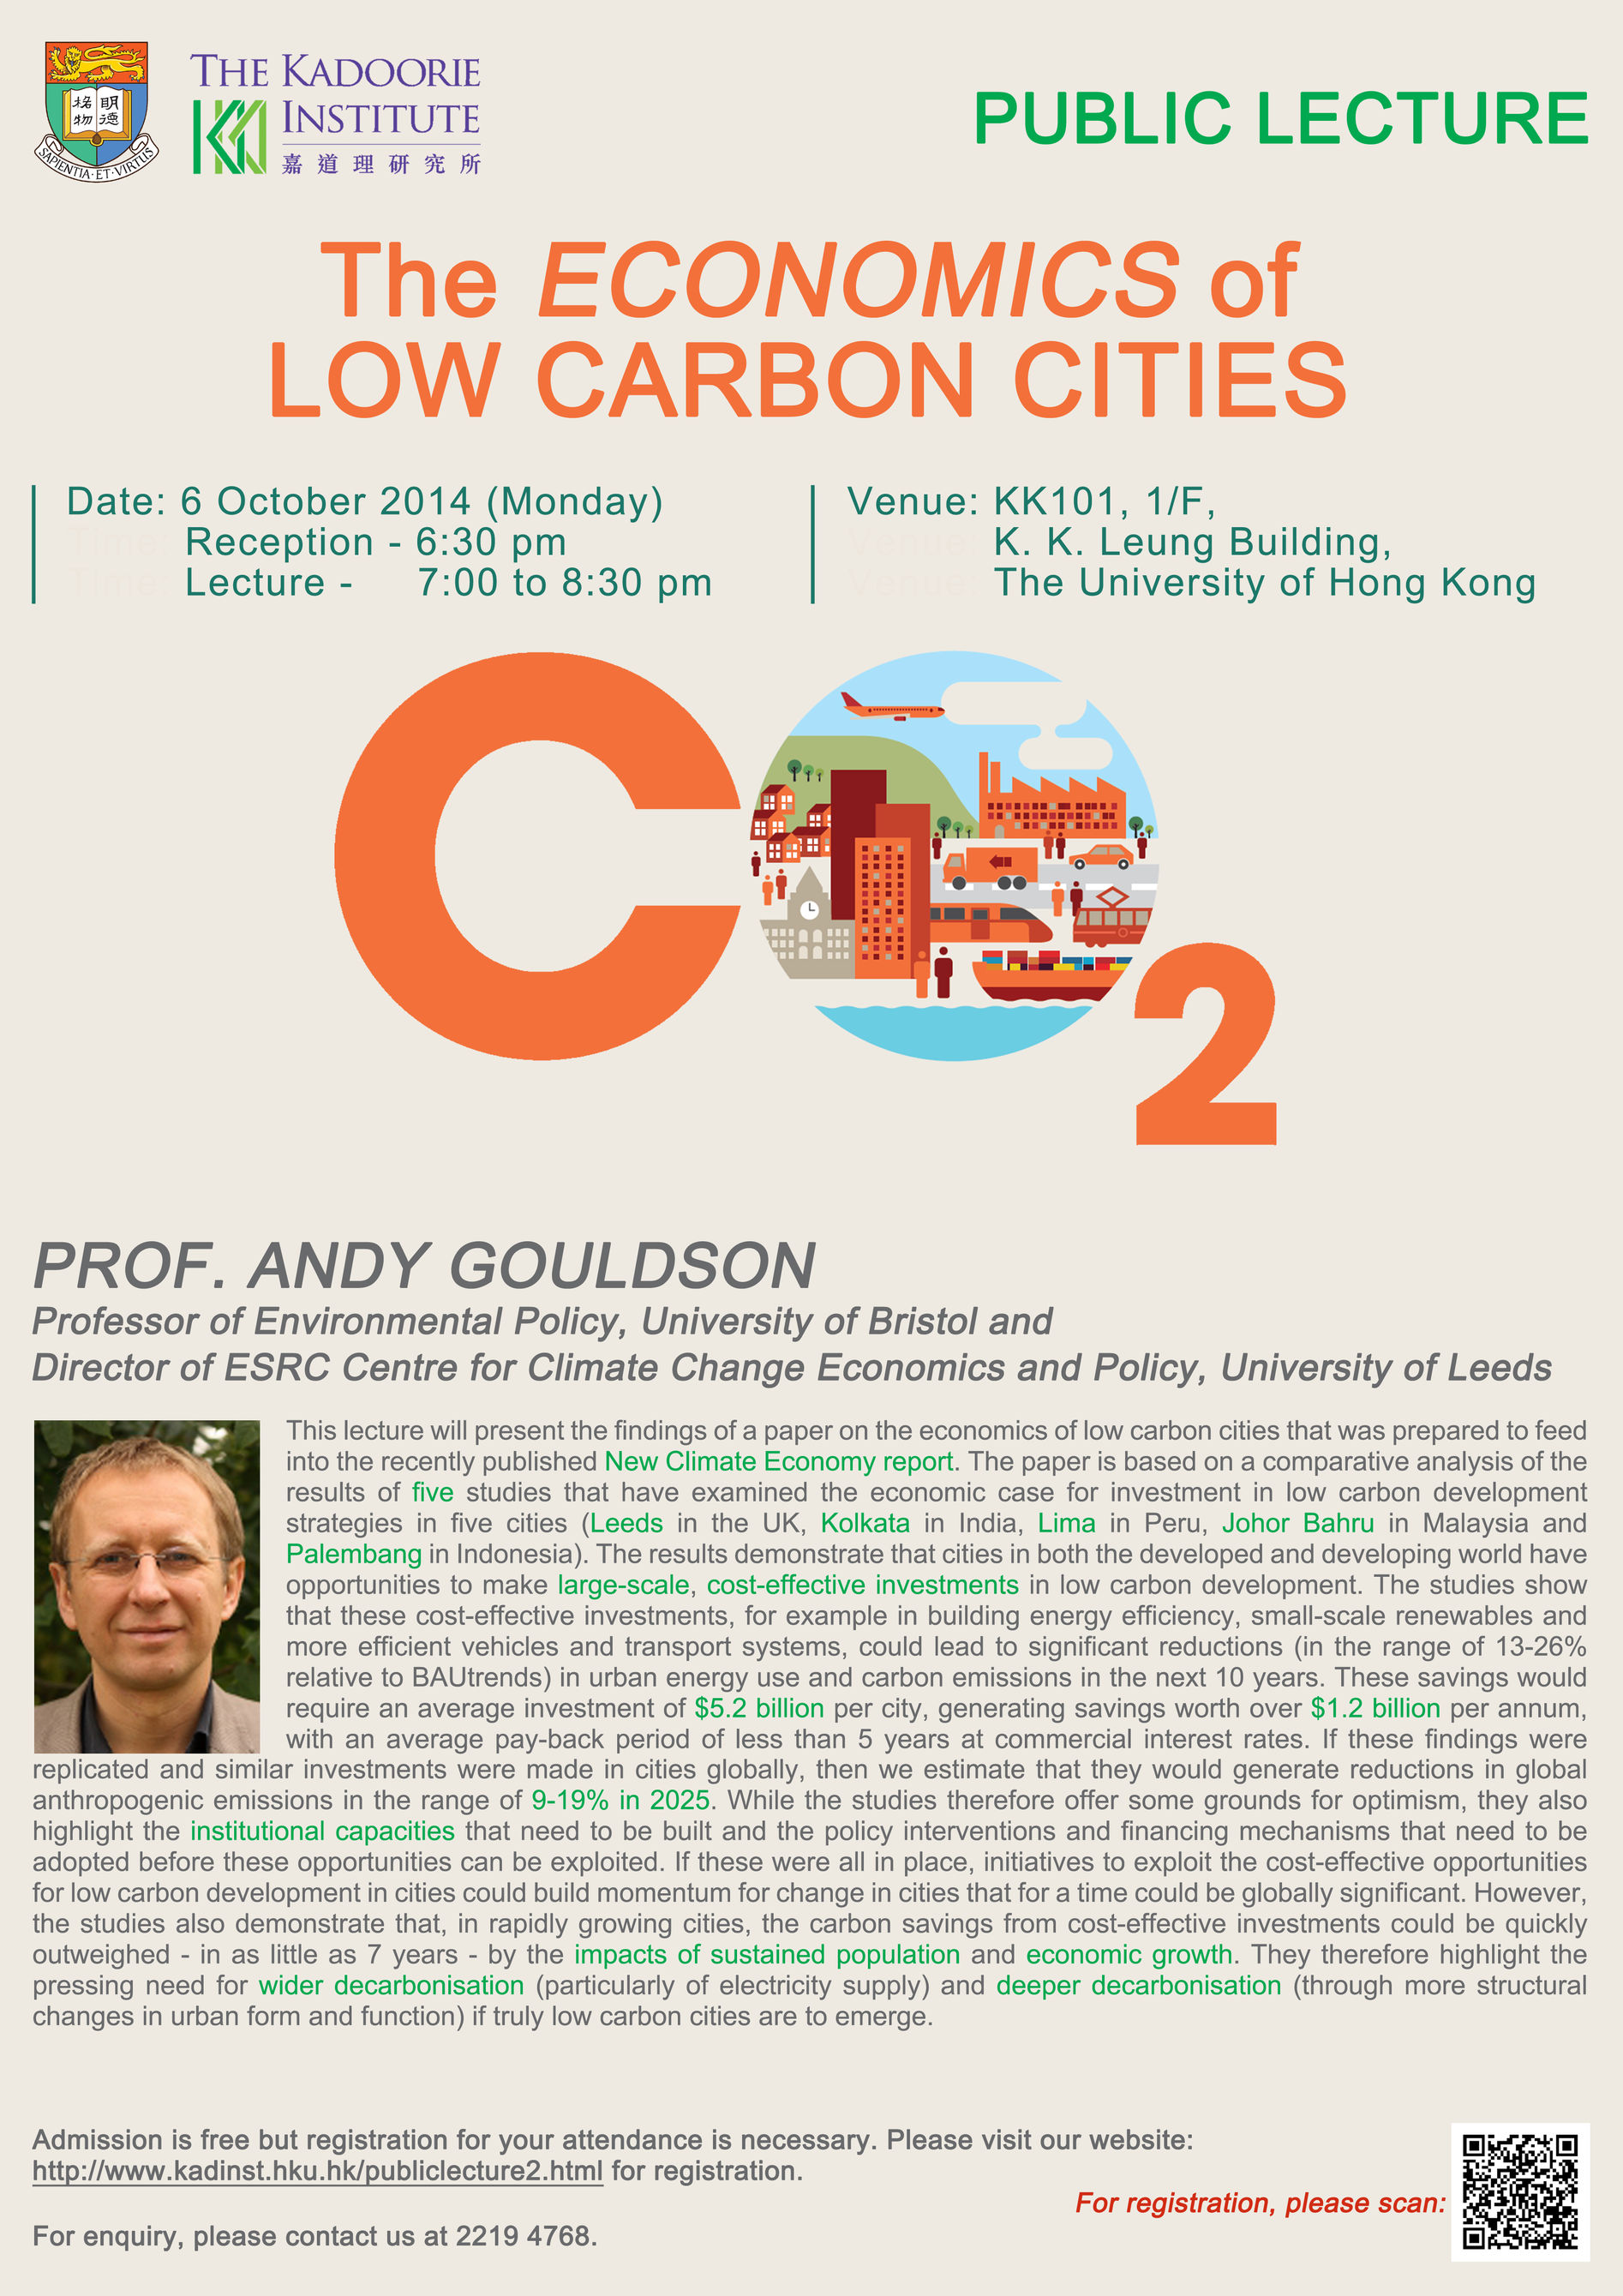 Public Lecture on The Economics of Low Carbon Cities - The Kadoorie Institute